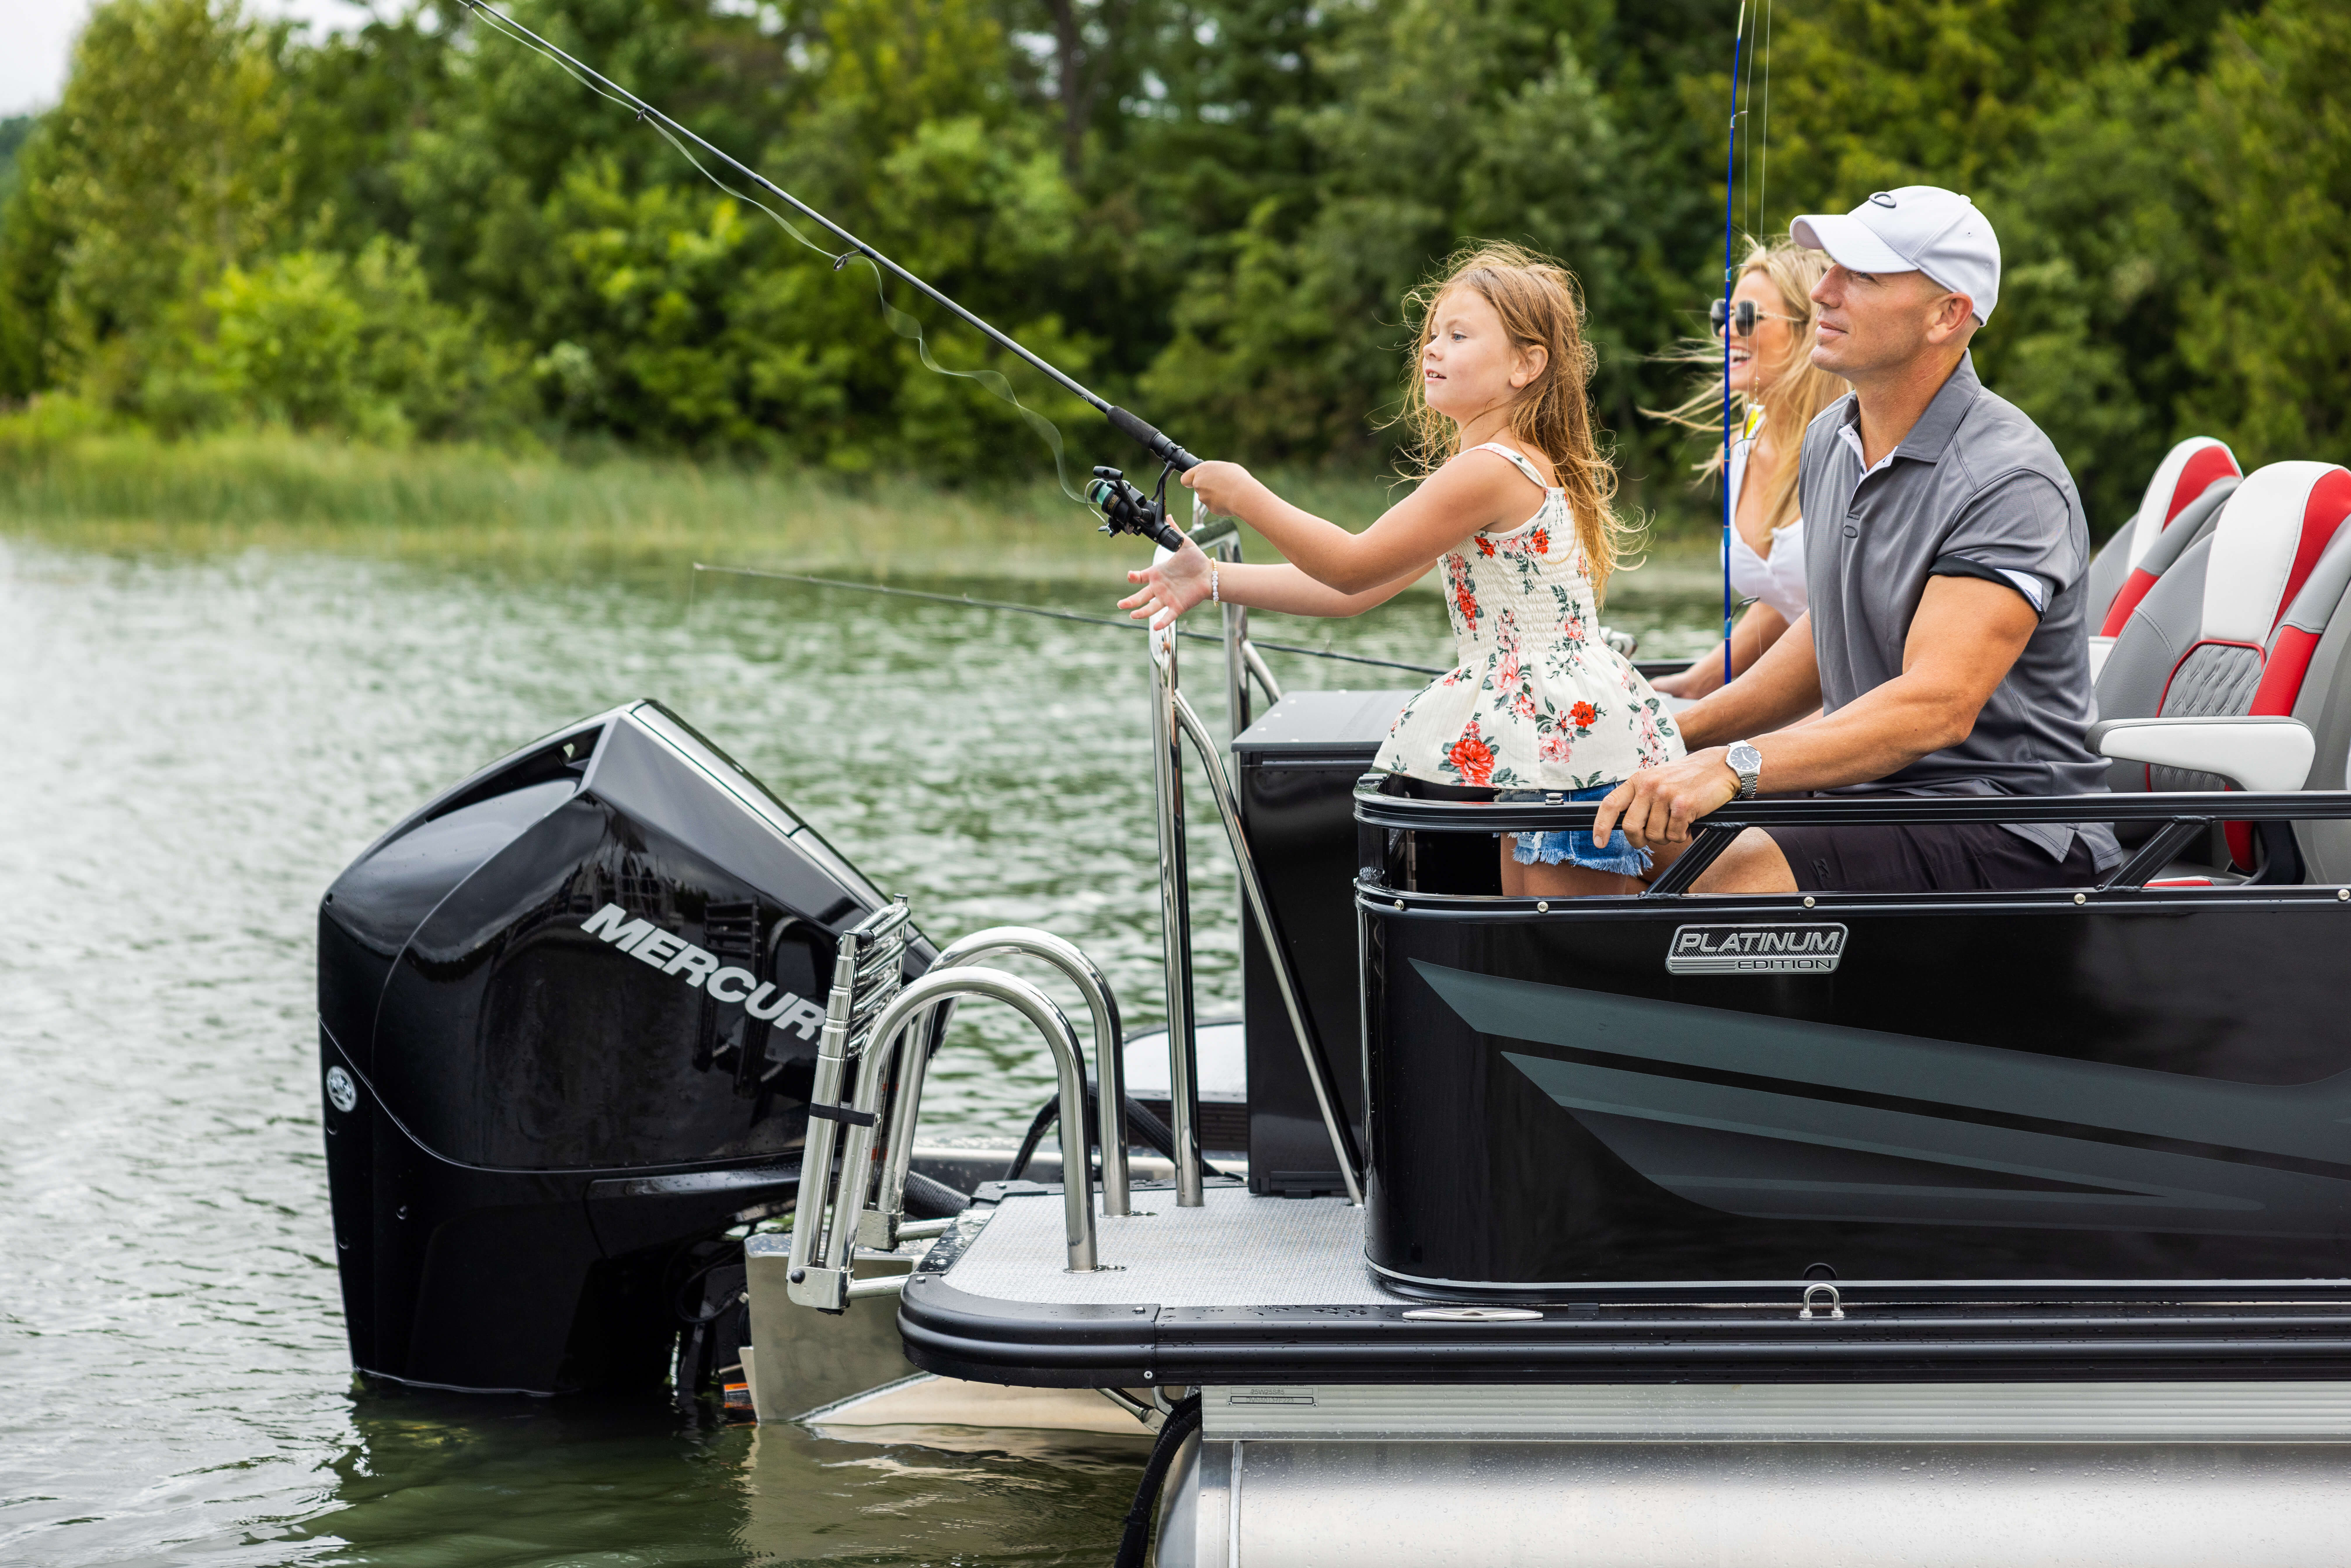 Venture 85 Pontoon Boats: Clean and Traditional Design - Avalon Pontoon  Boats